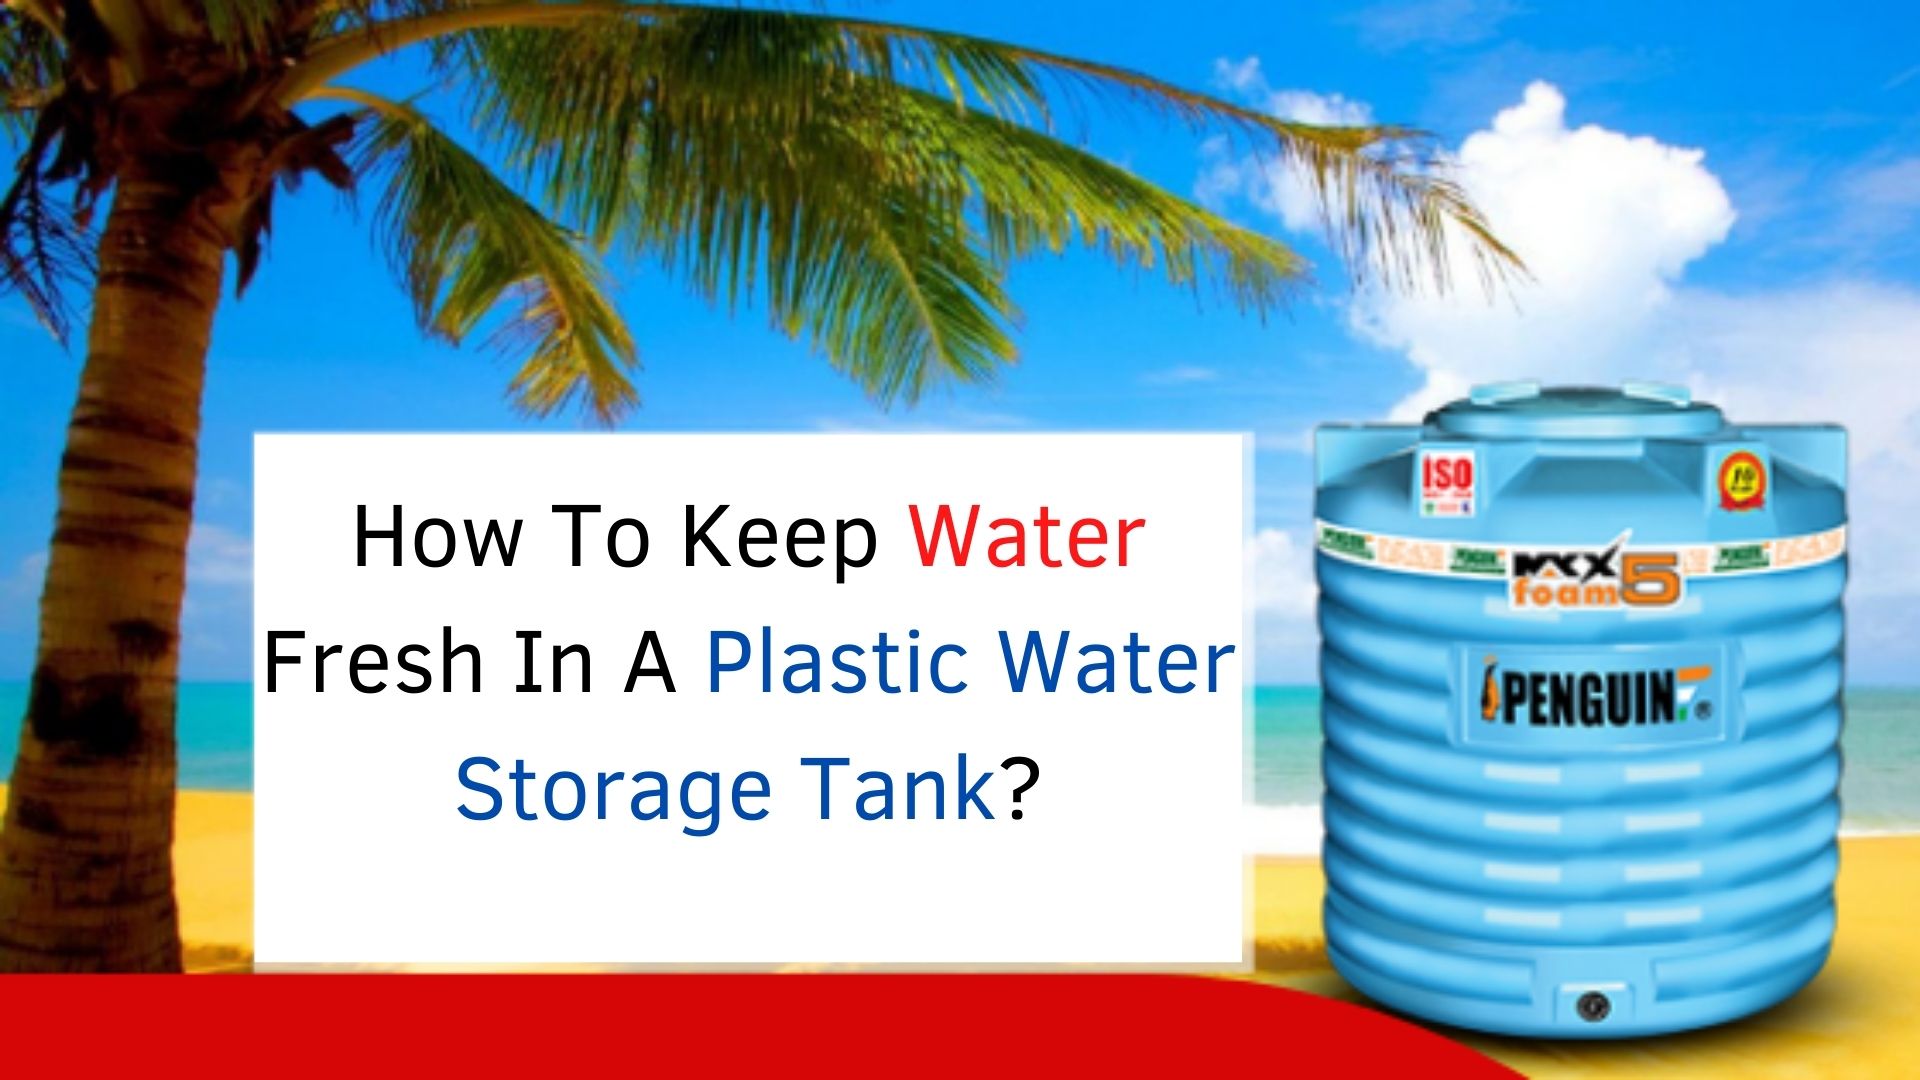 How To Keep Water Fresh In A Plastic Water Storage Tank?